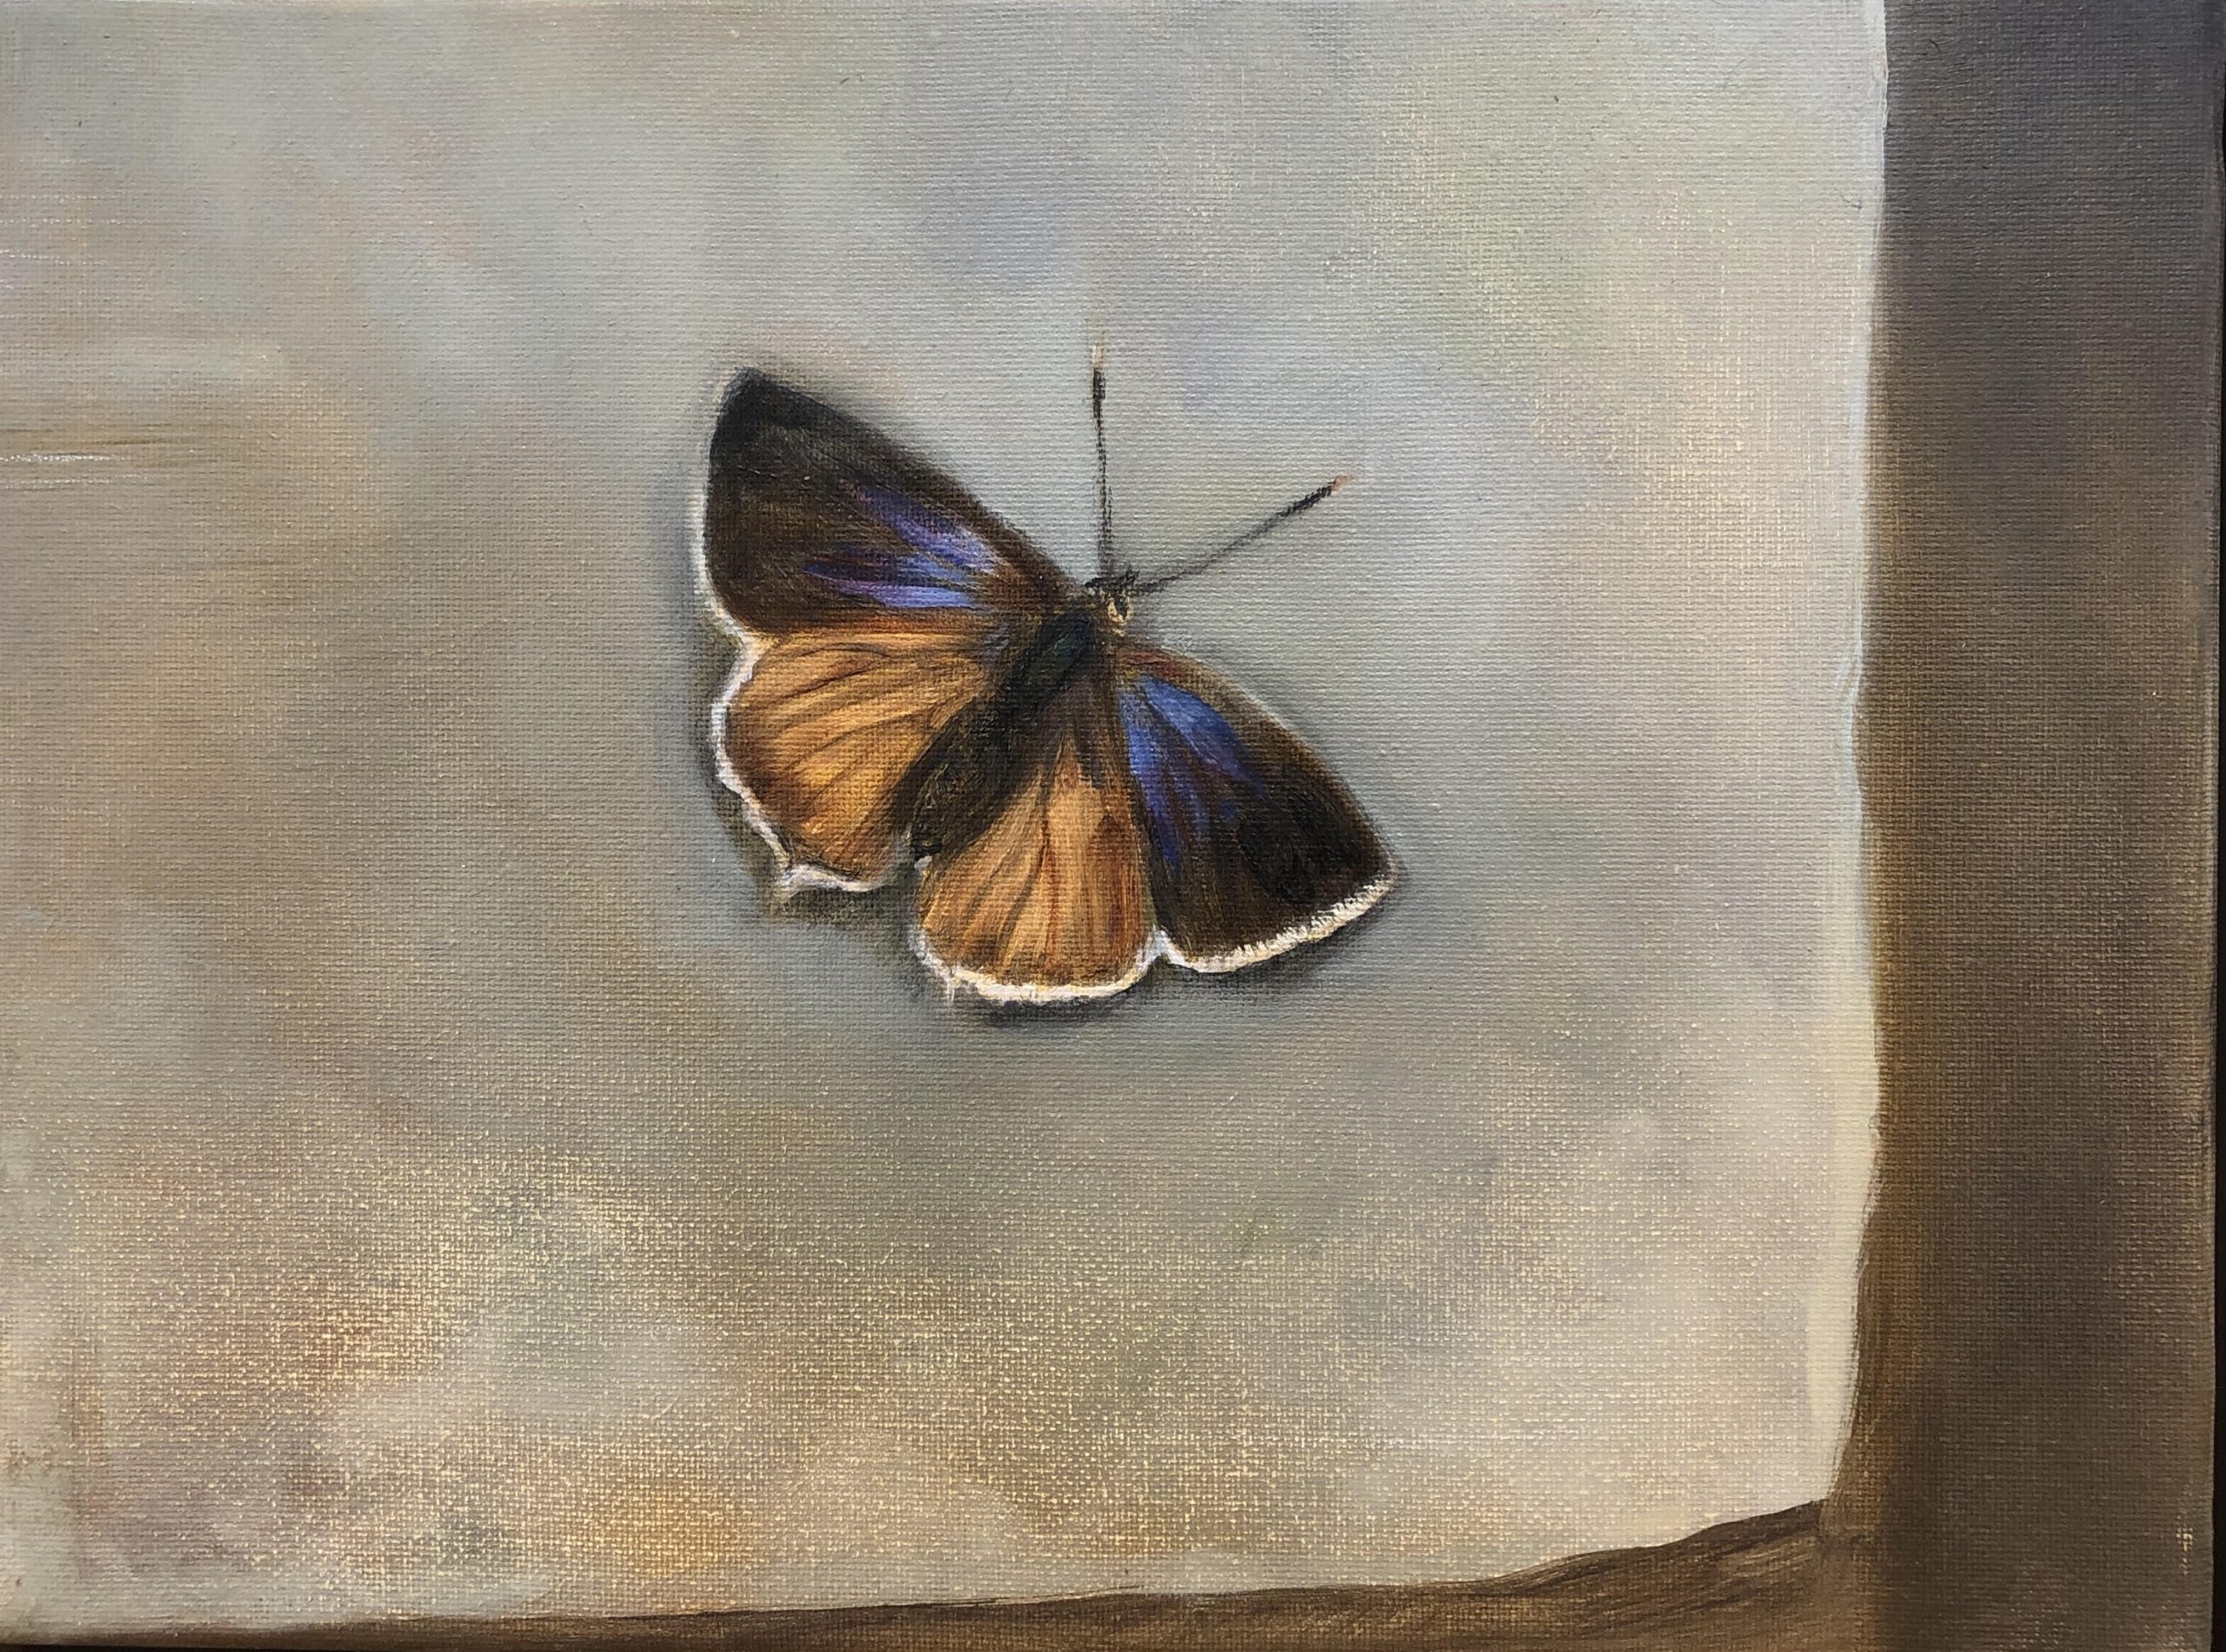 Purple Hairstreak by Beatrice O'Connell